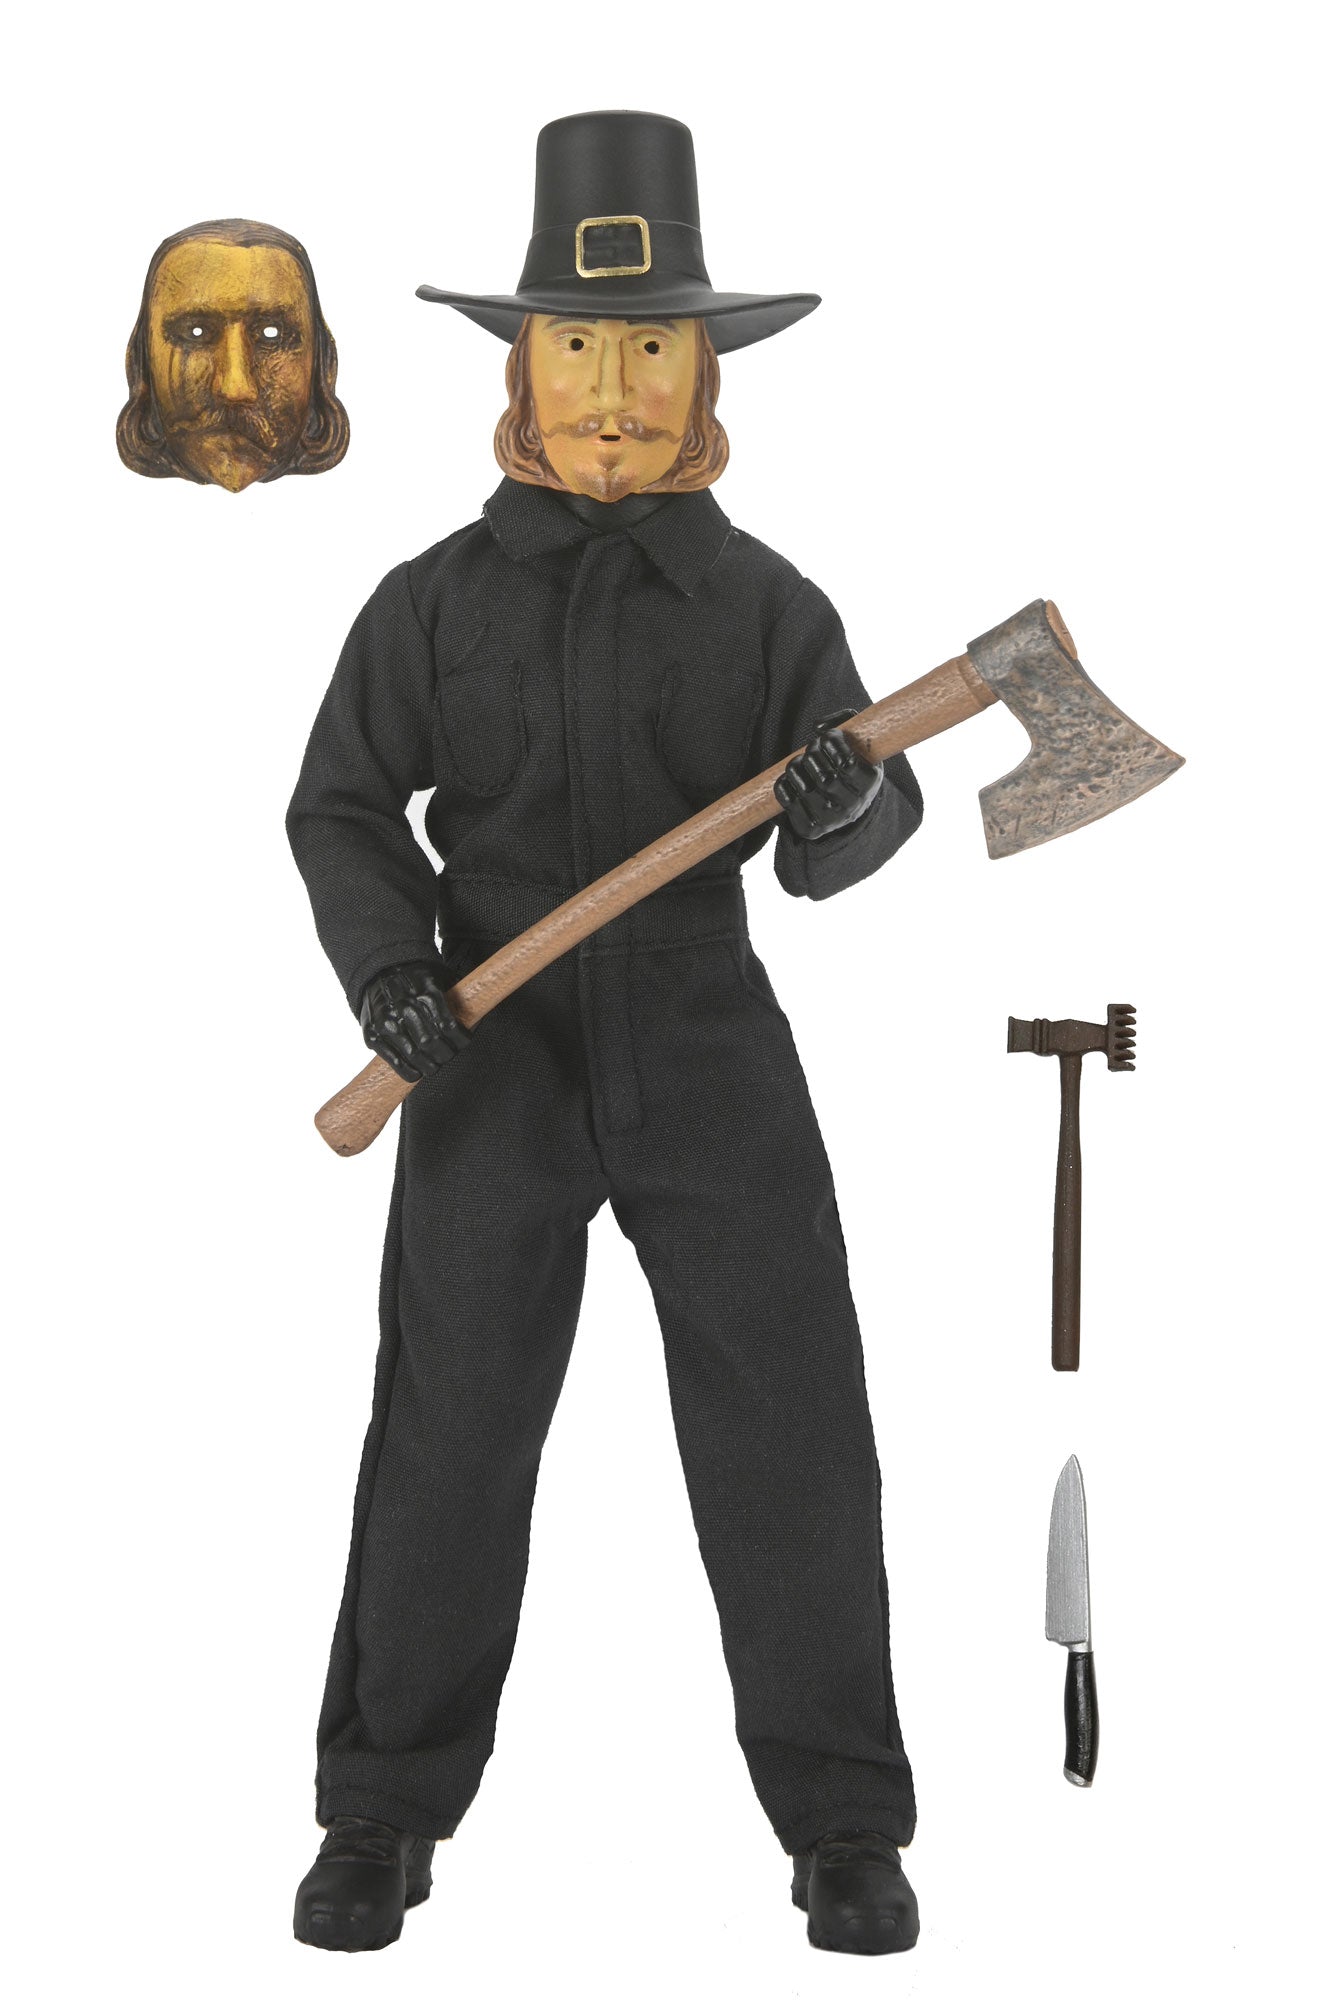 John Carver 8” Clothed Action Figure with accessories